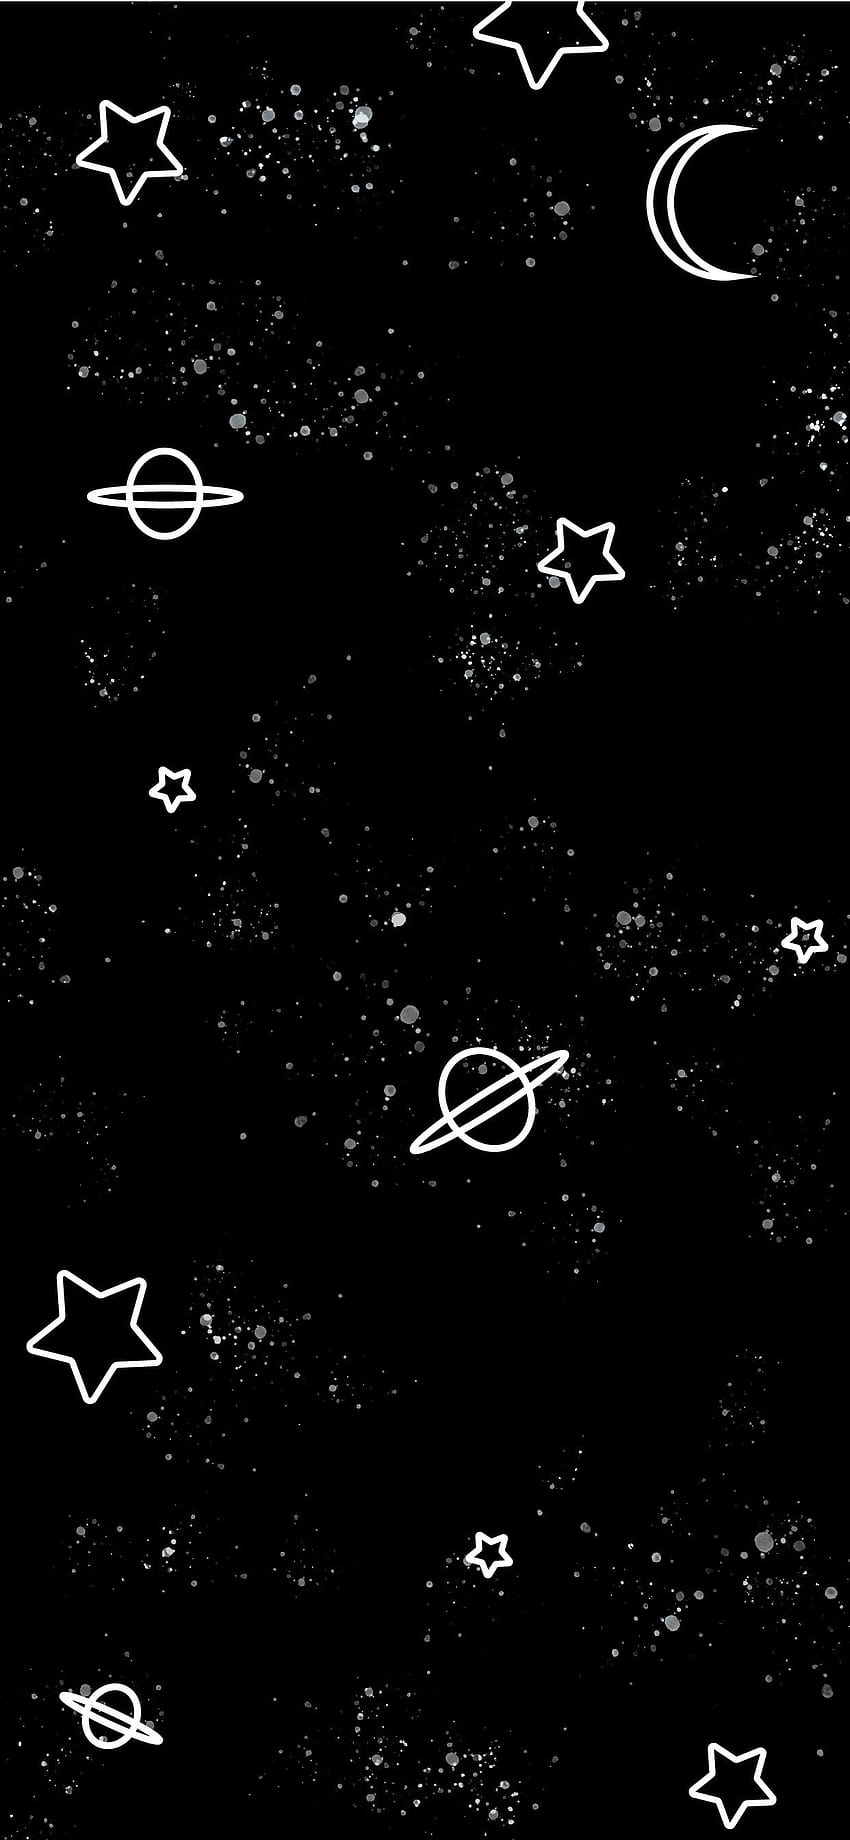 Cartoon Rocket Black And White Cosmic Lineart Astronaut Background Wallpaper  Image For Free Download  Pngtree